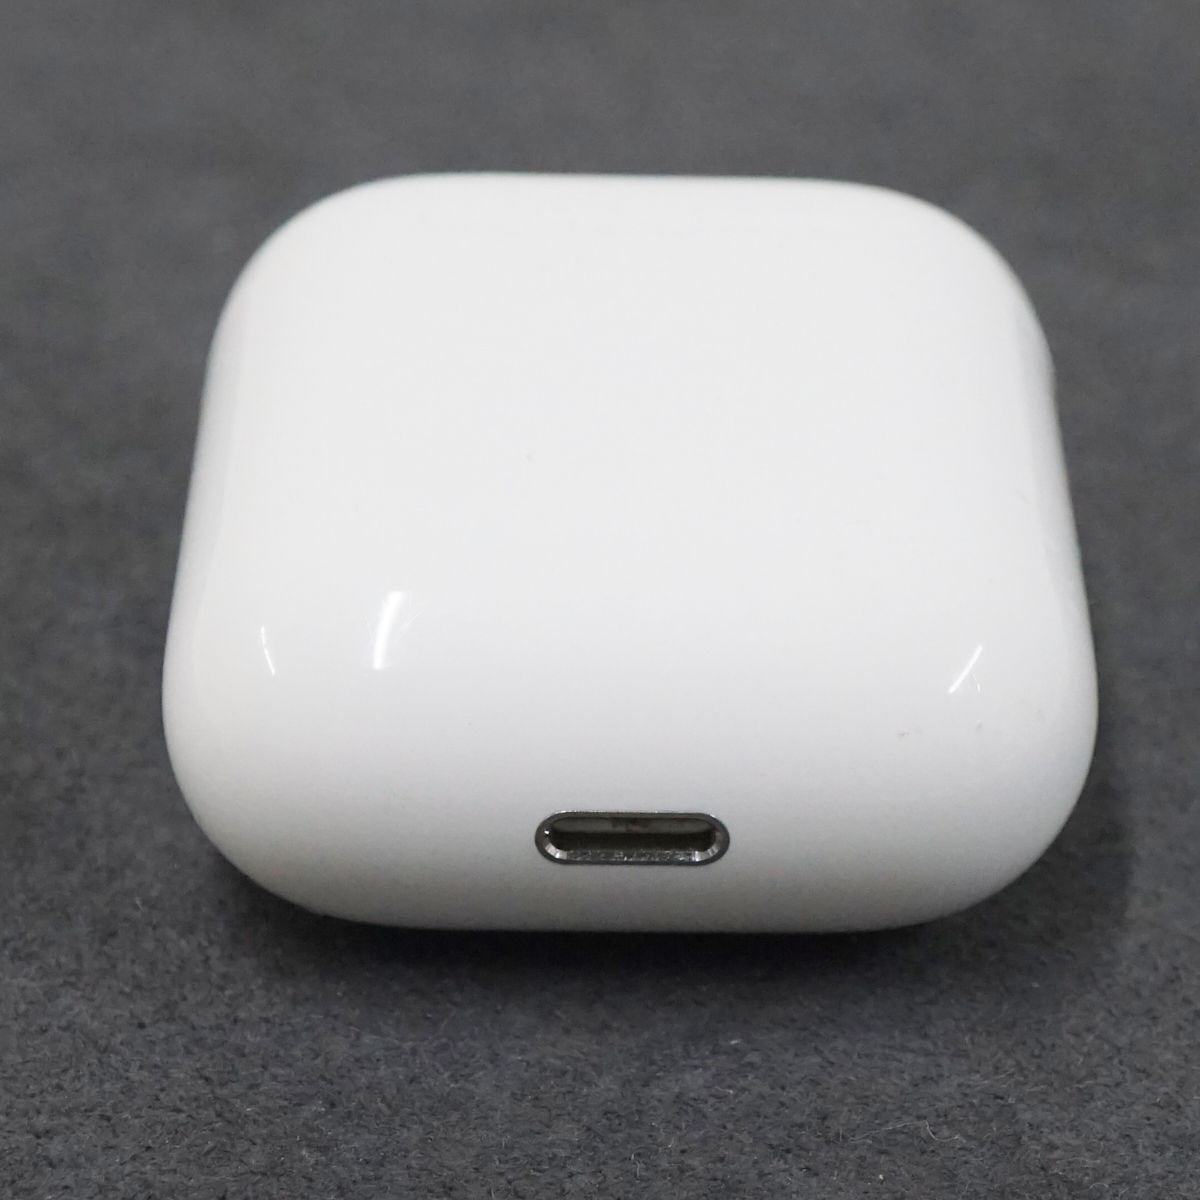 Apple AirPods with Charging Case エアーポッズ 充電ケースのみ 第二